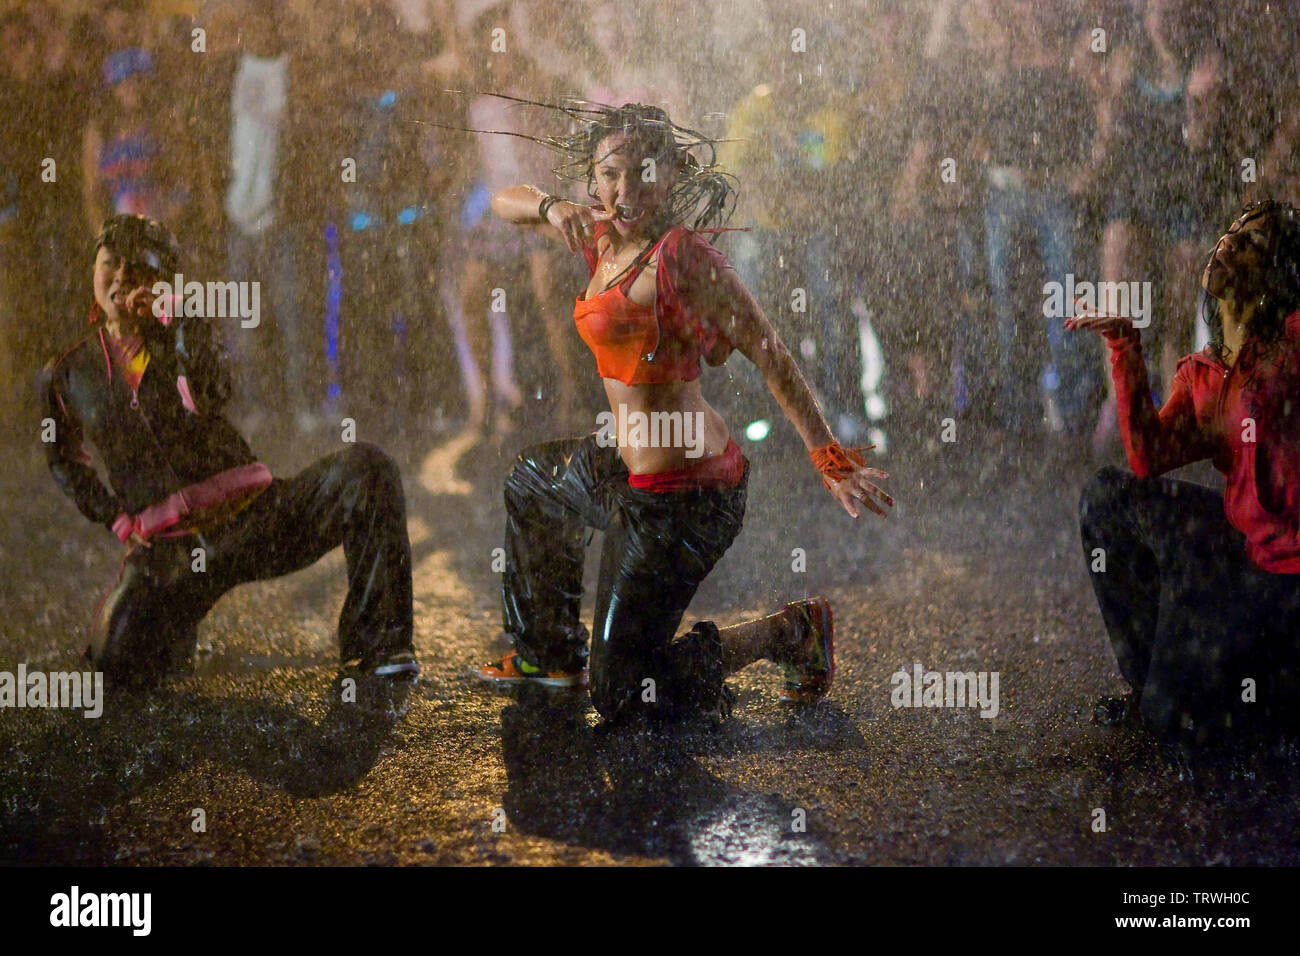 BRIANA EVIGAN , DANIELLE POLANCO and MARI KODA in STEP UP 2: THE STREETS (2008). Copyright: Editorial use only. No merchandising or book covers. This is a publicly distributed handout. Access rights only, no license of copyright provided. Only to be reproduced in conjunction with promotion of this film. Credit: OFFSPRING ENTERTAINMENT/SUMMIT ENTERTAINMENT/TOUCHSTONE PICT / BATZDORFF, RON / Album Stock Photo